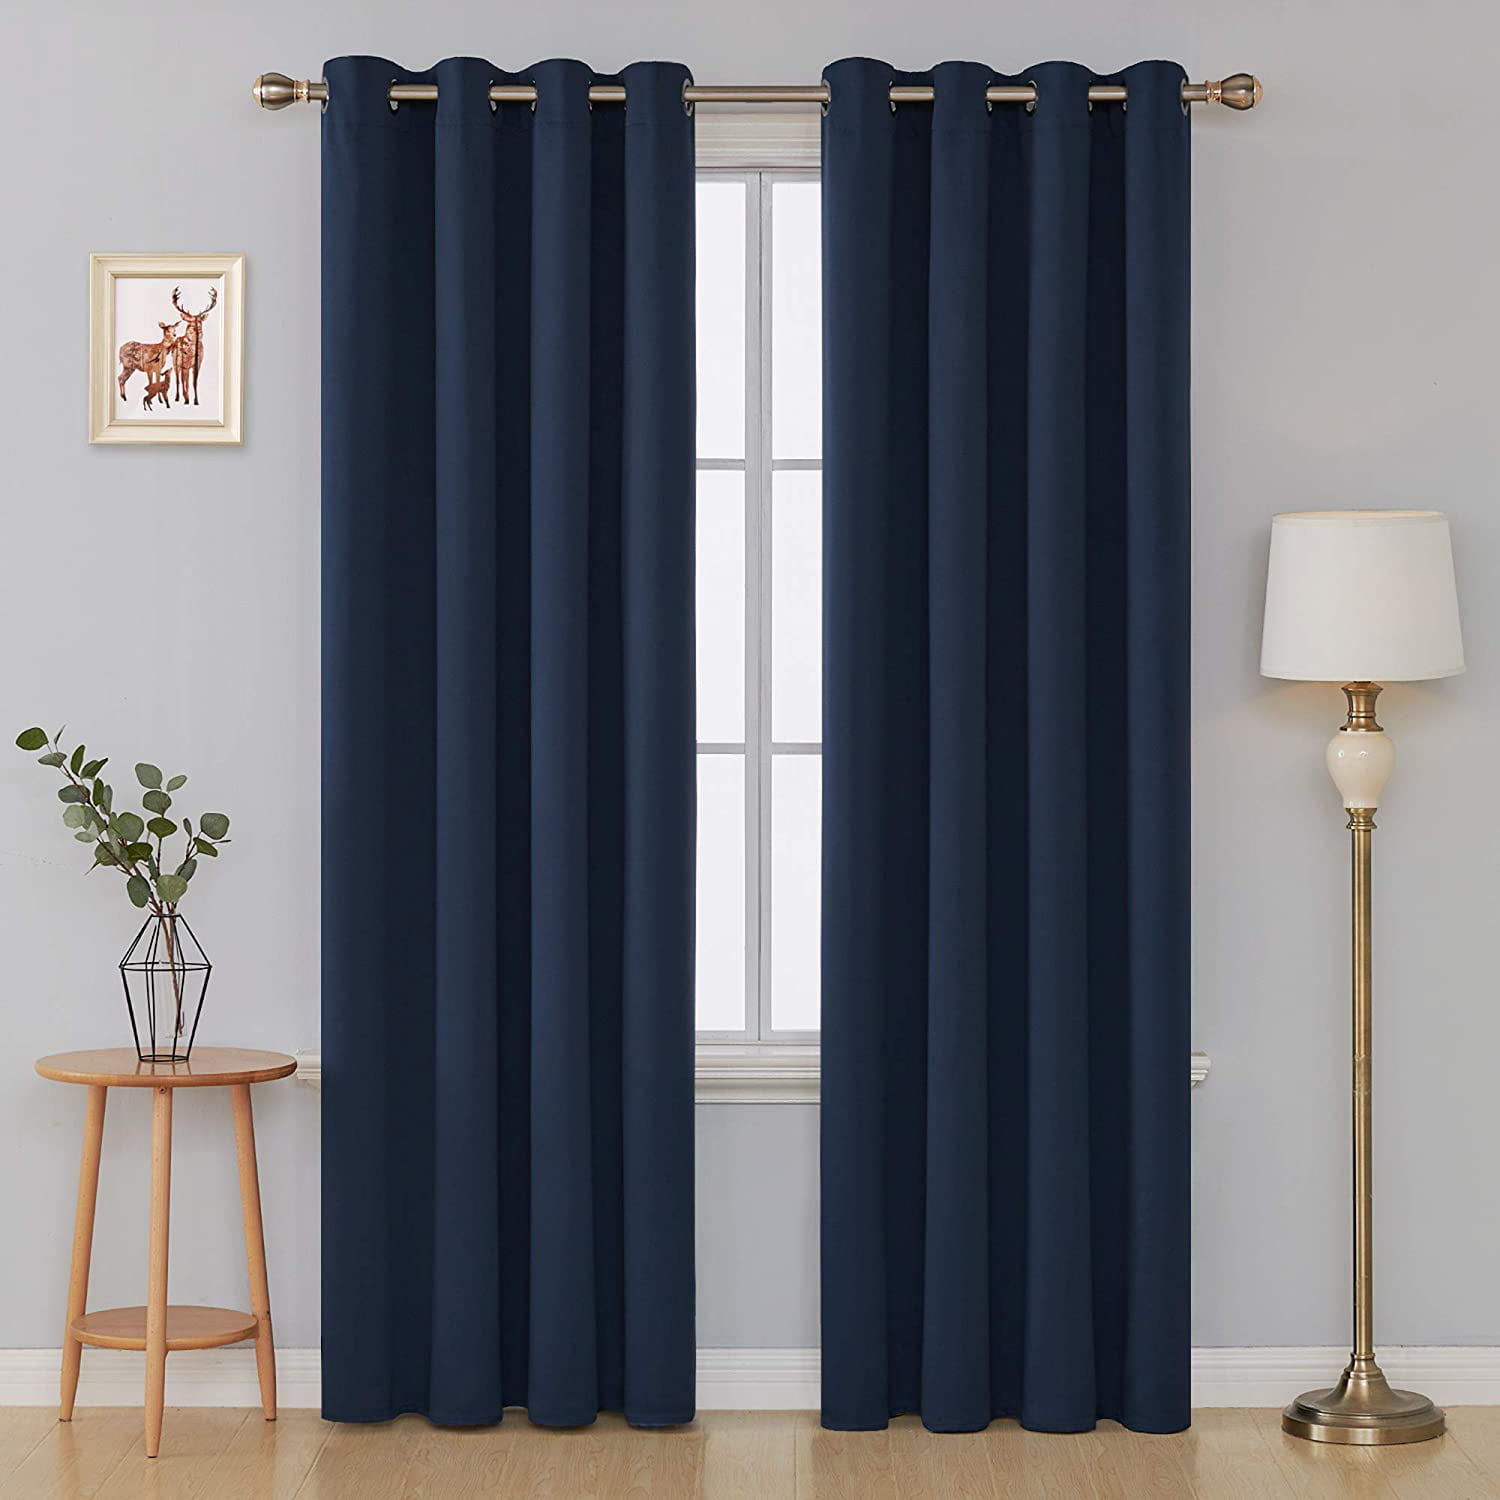 Deconovo Grommet Blackout Curtains Room Darkening Thermal Insulated